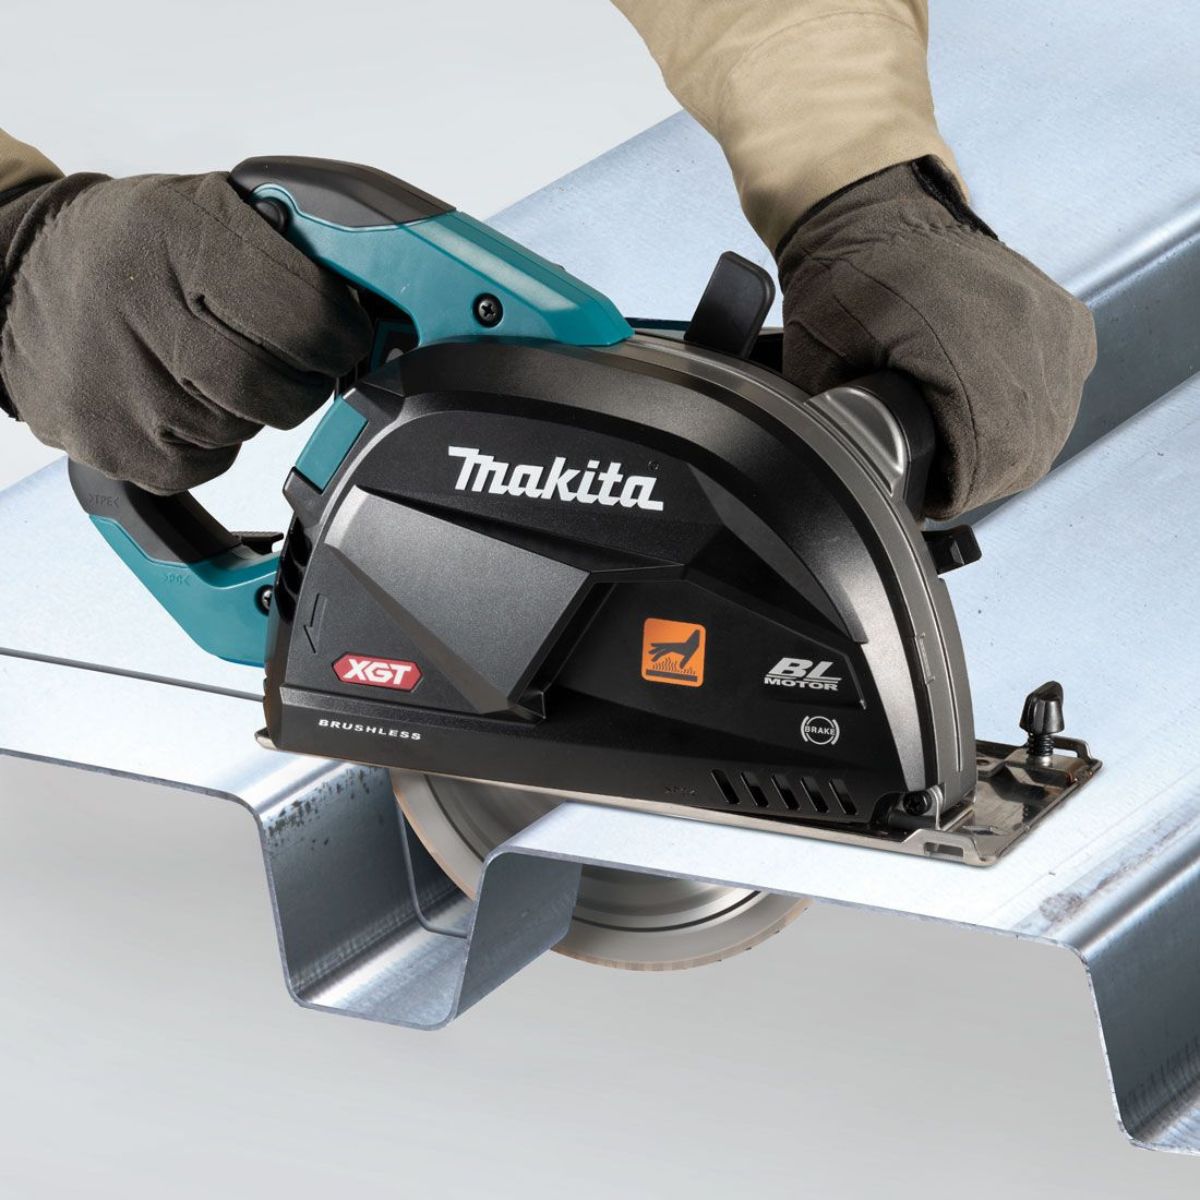 Makita CS002GZ01 40V Max XGT 185mm Brushless Metal Cutter Saw With Type 4 Case